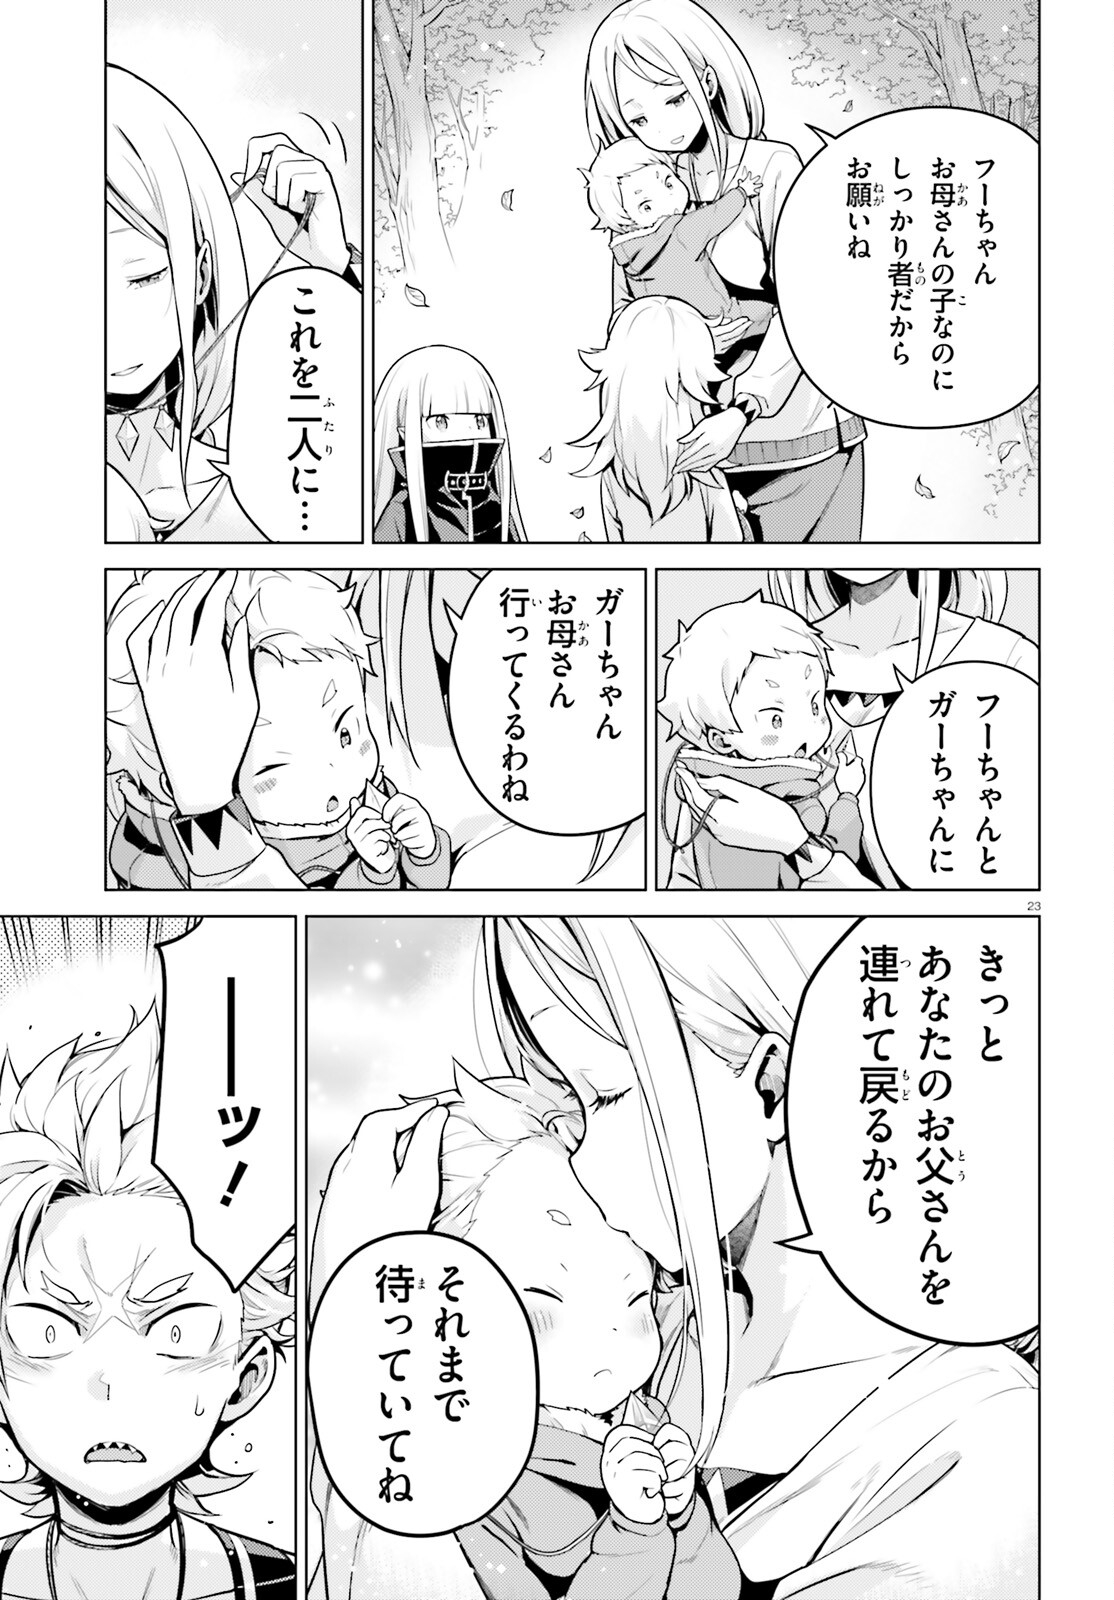 Reゼロから始める異世界生活 第四章 聖域と強欲の魔女 第49話 - Page 23